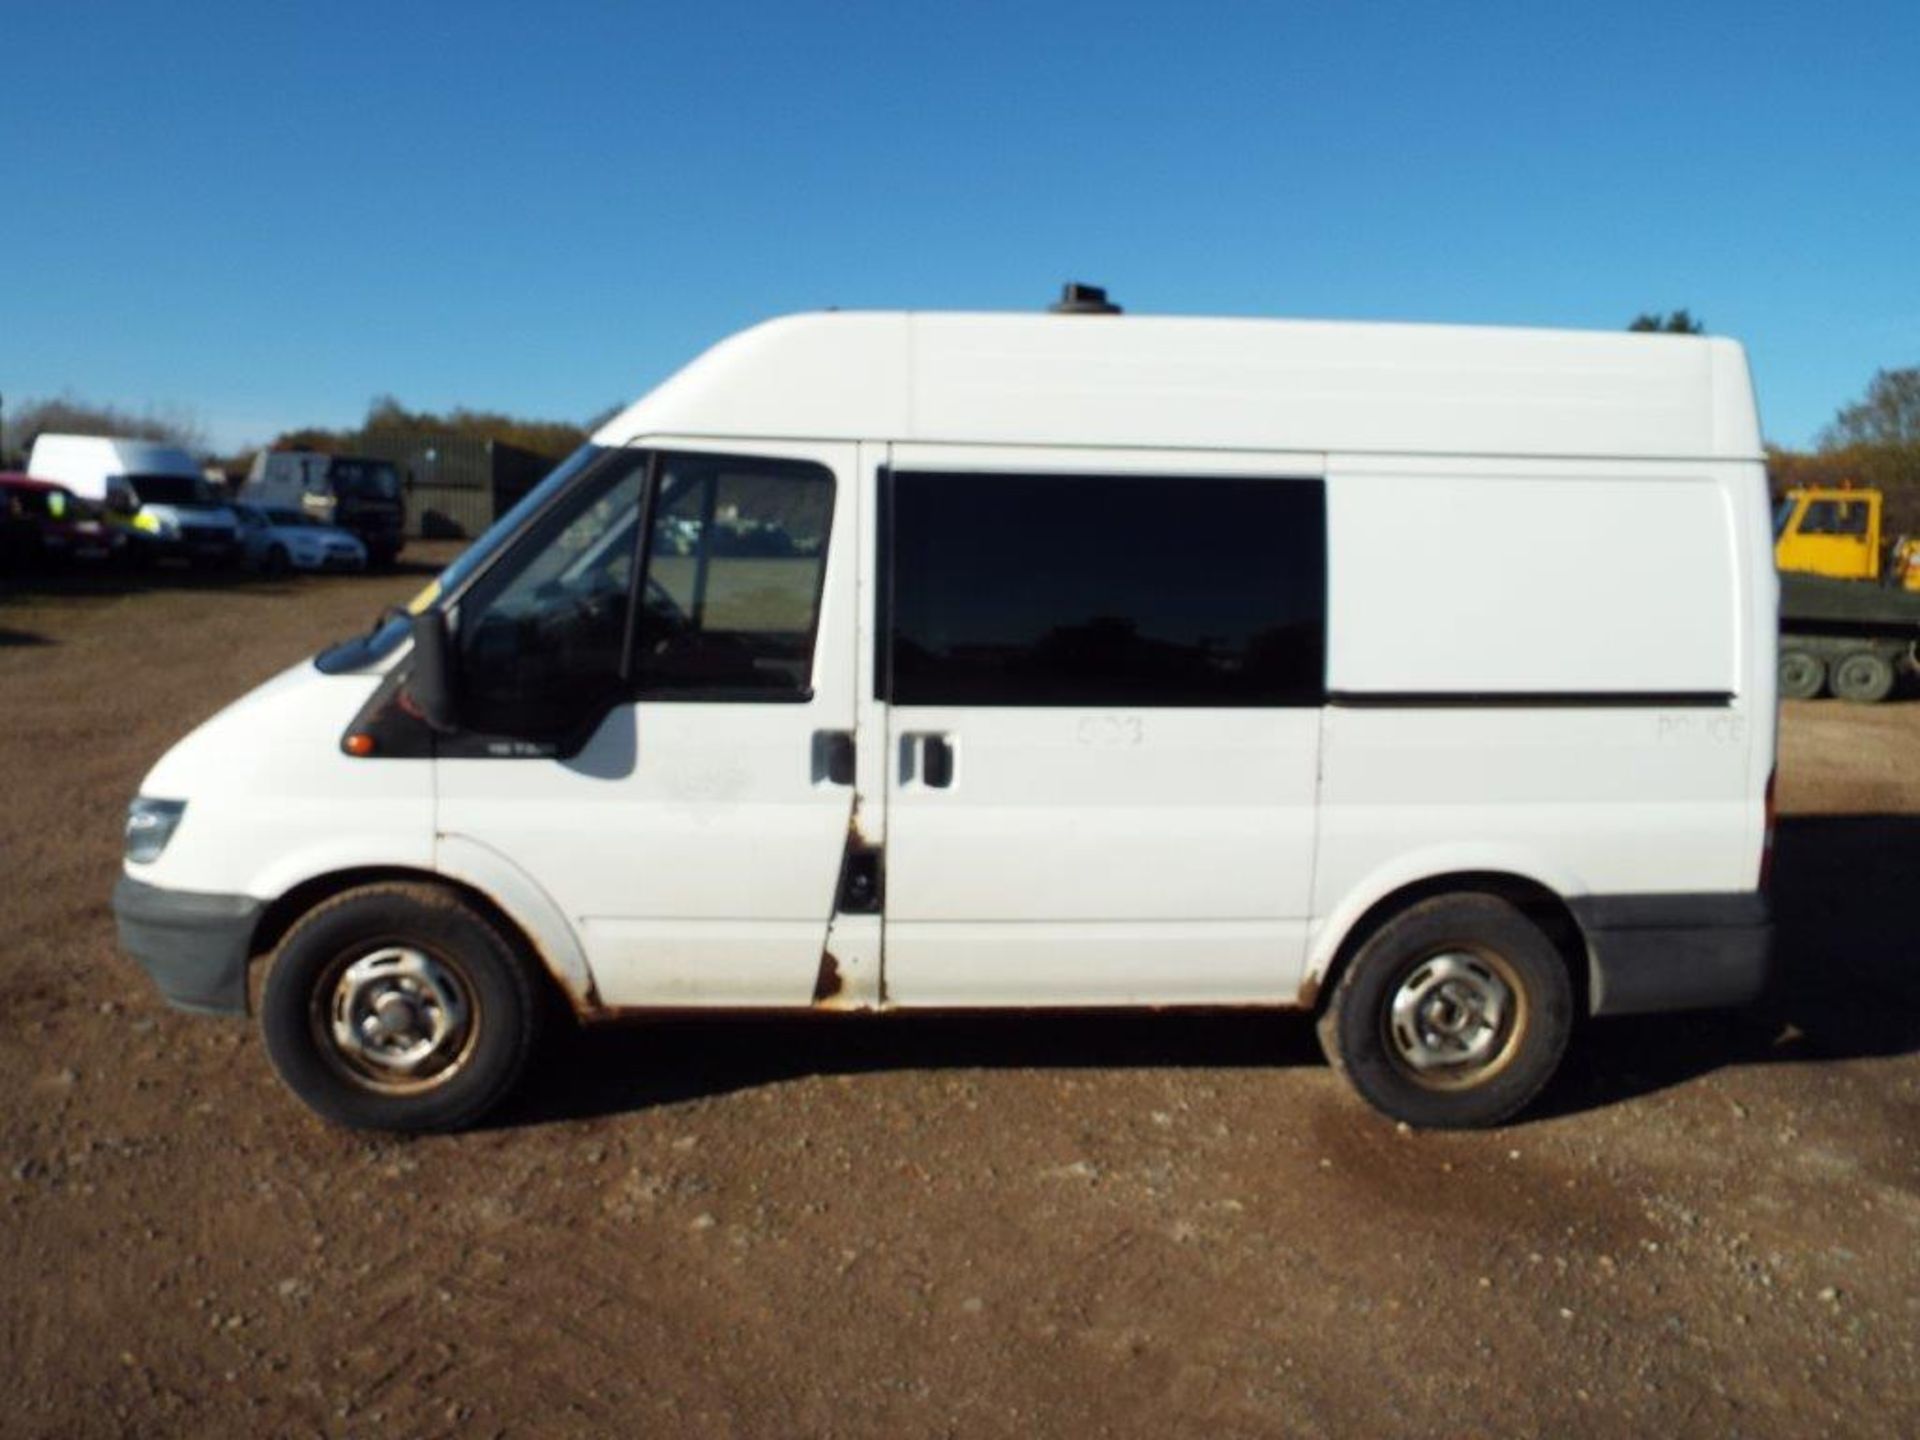 Ford Transit 330 SWB Crew Cab Panel Van with Rear Security Cage - Image 8 of 26